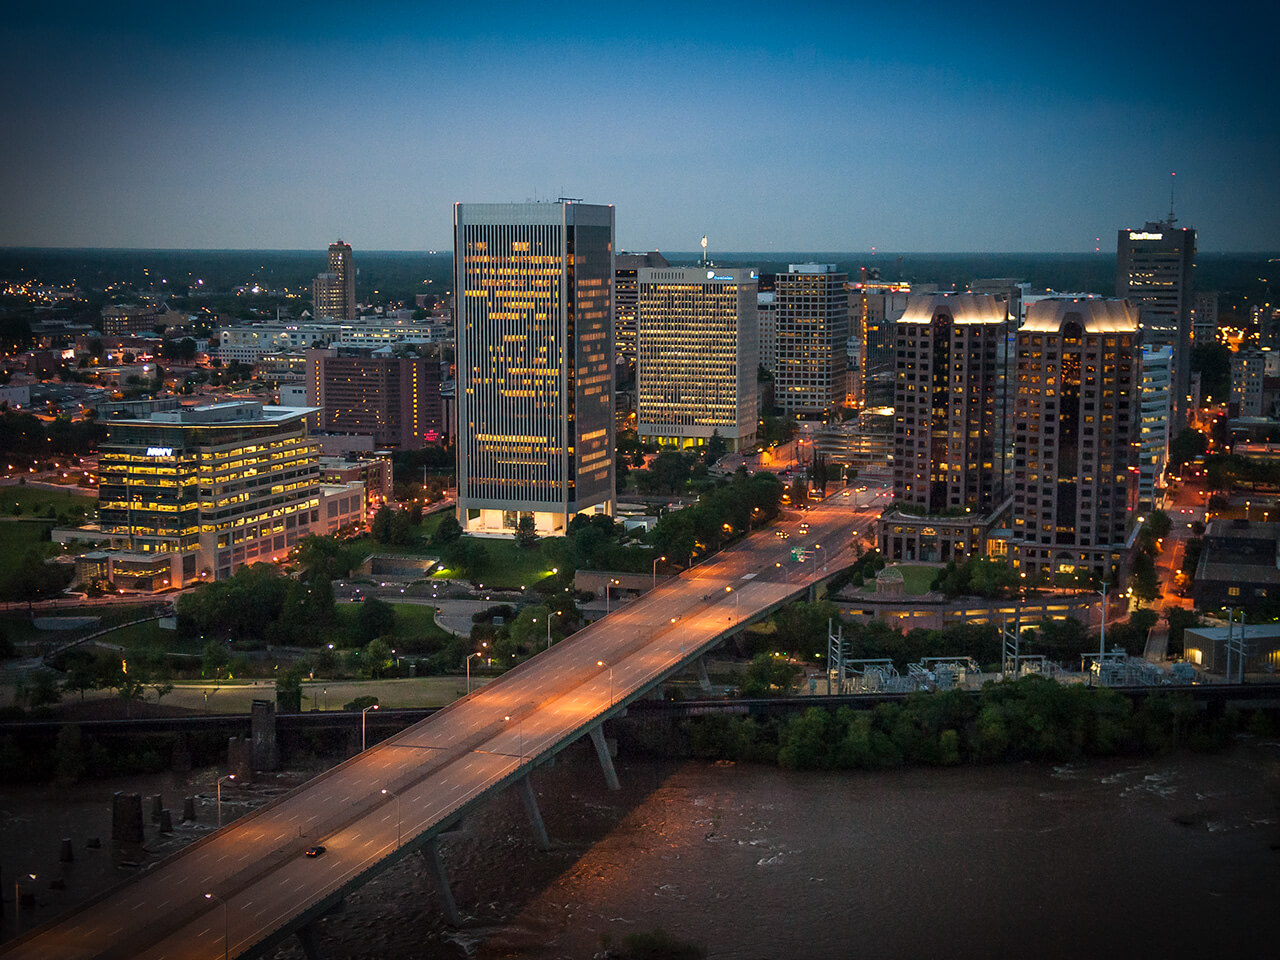 View of Richmond city at night time